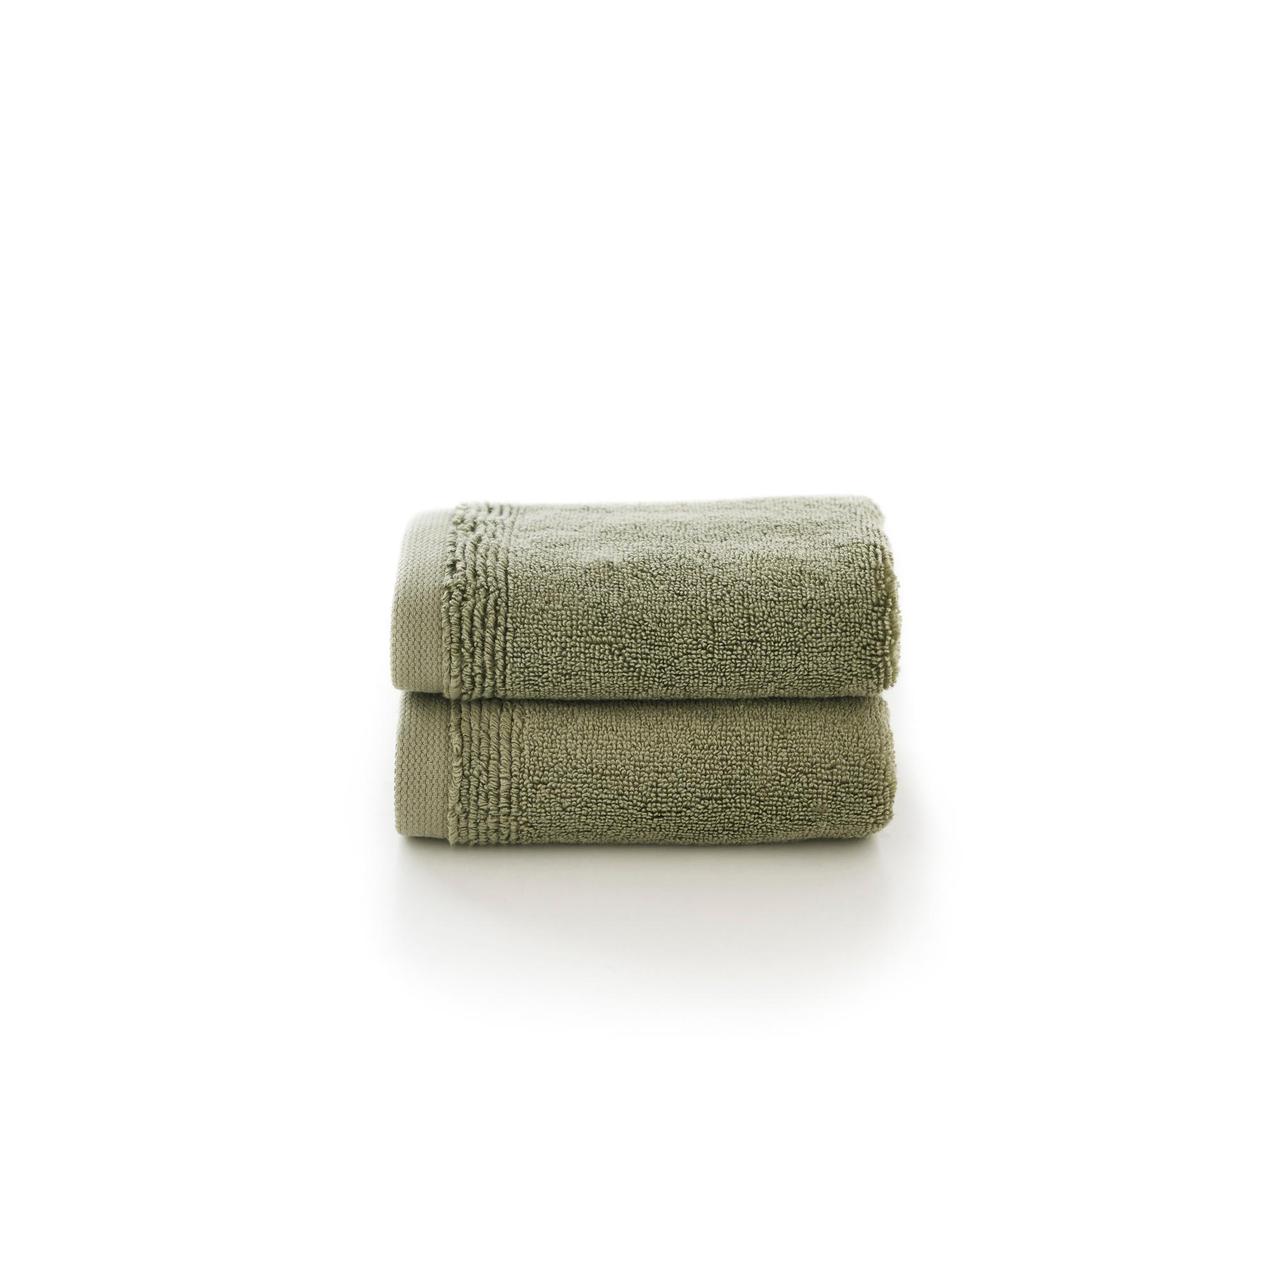 Deyongs Palazzo 800gsm Hotel Luxury Cotton Face Cloth x 2 Green